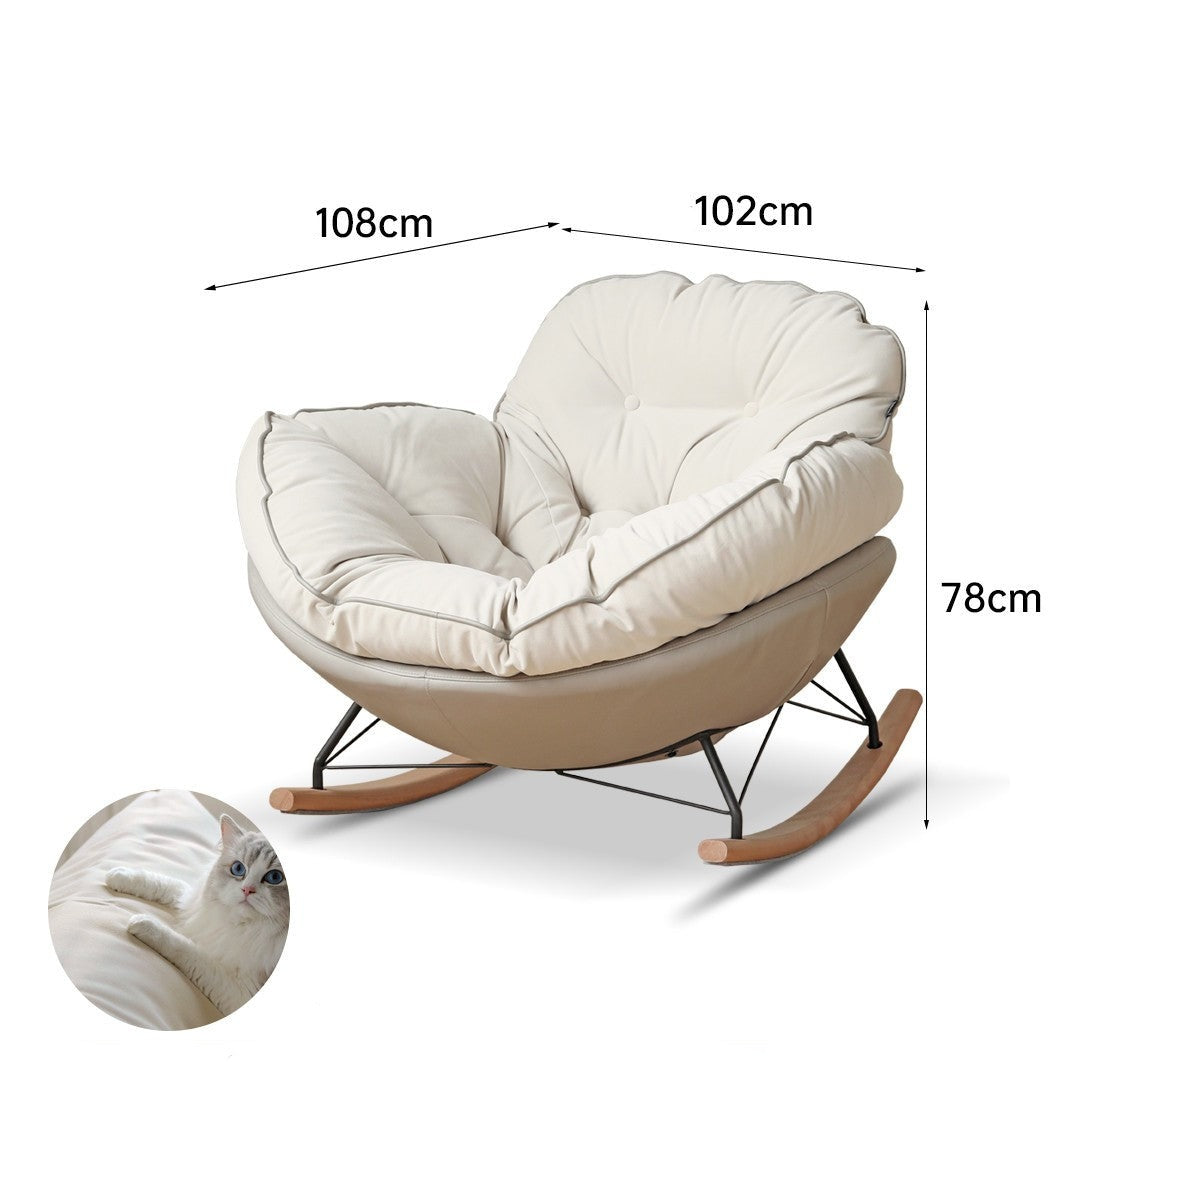 Baby cotton,Beech rocking chair)